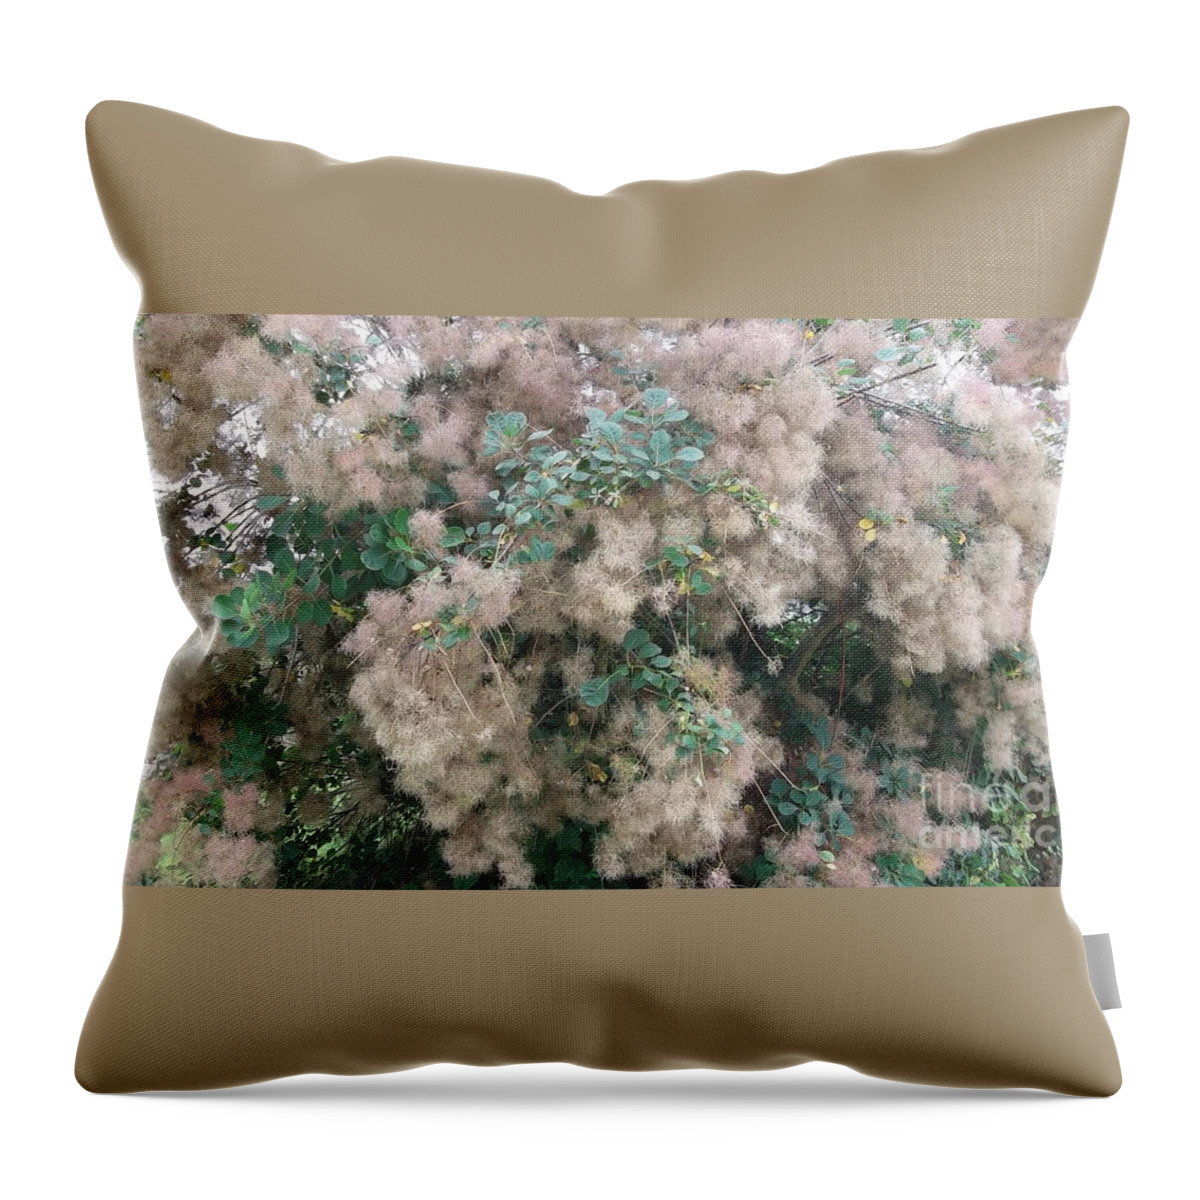 Fluffy Blossom Throw Pillow featuring the photograph Fluffy Blossom by Tracey Williams